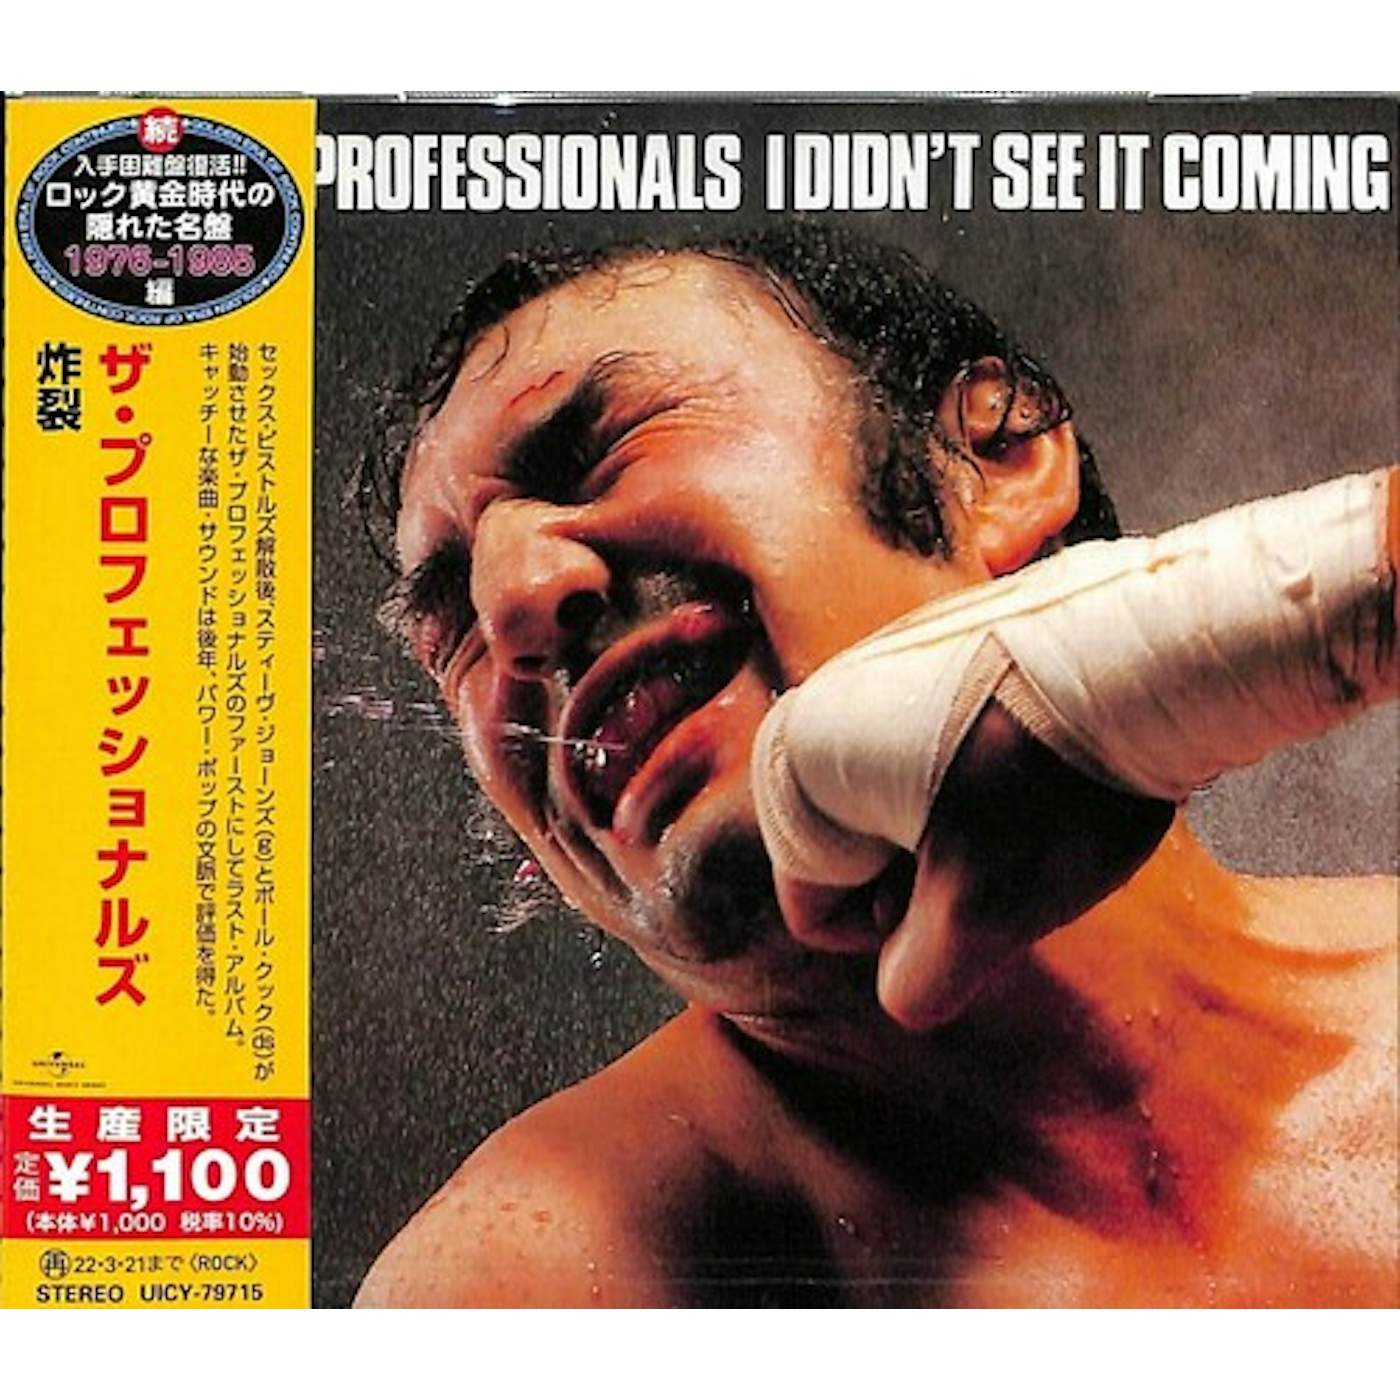 The Professionals I DIDN'T SEE IT COMING CD